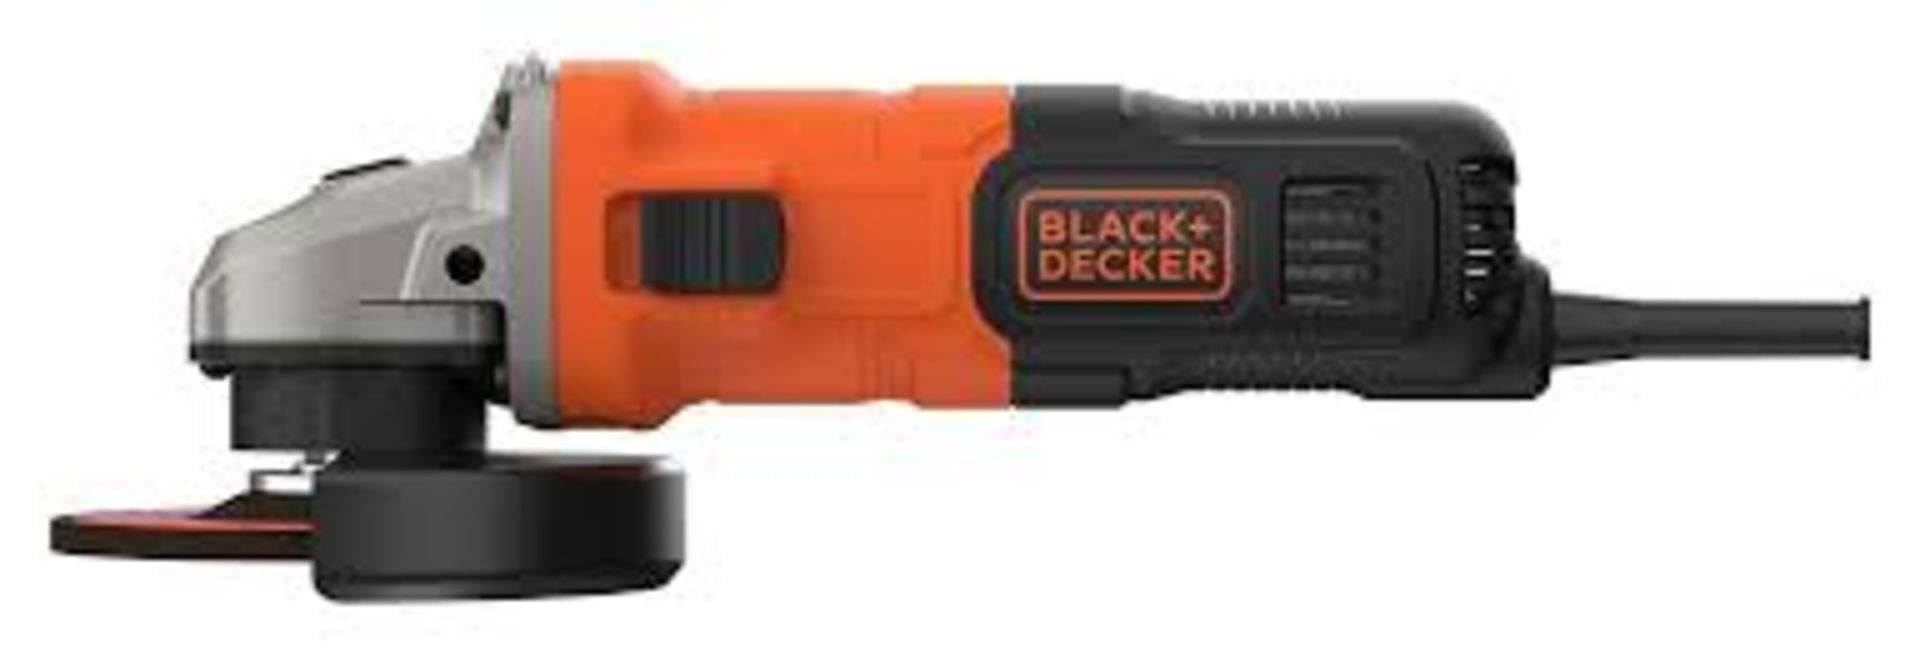 BLACK+DECKER 710 W Grinder Power Tool 115 mm. - PW. The powerful 710W Angle Grinder makes easy